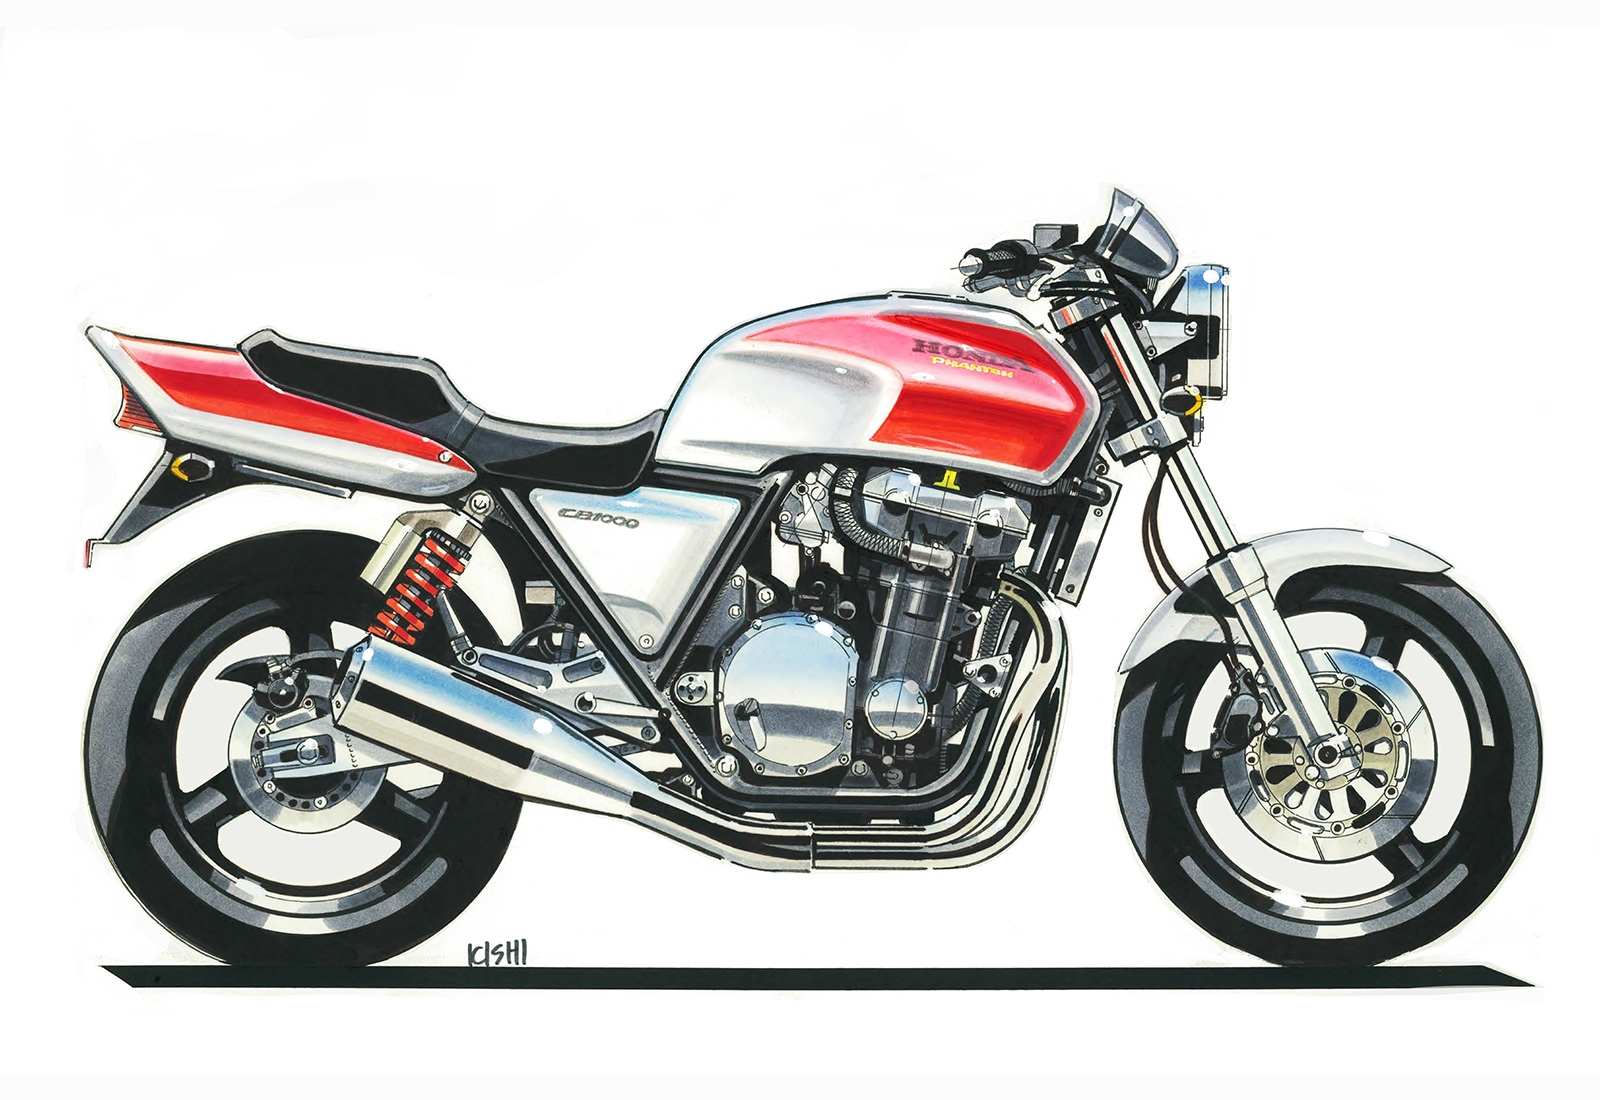 CB1000 SUPER FOURファイナルスケッチ